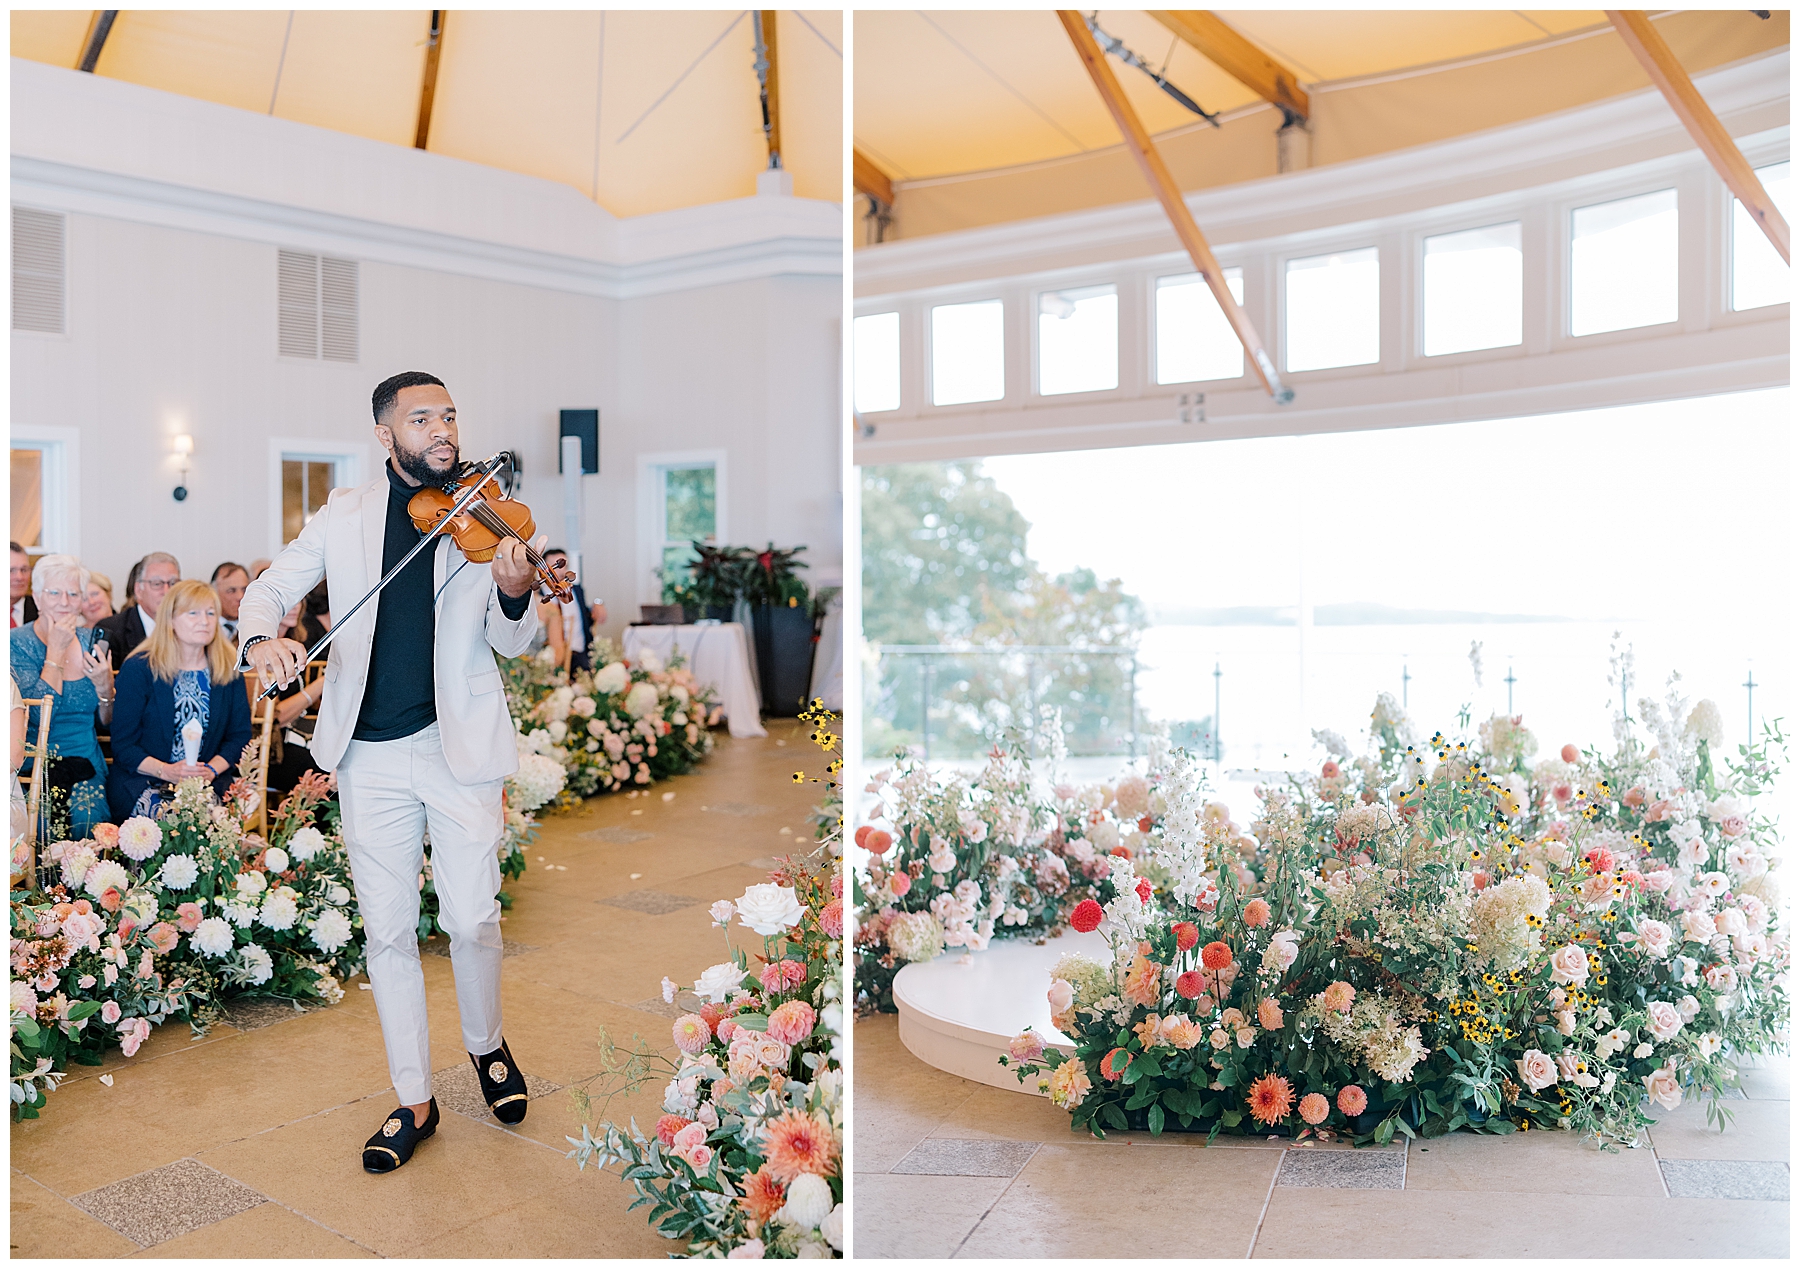 John the violinist plays at Luxury Cape Cod Wedding ceremony at the Wequassett Resort 